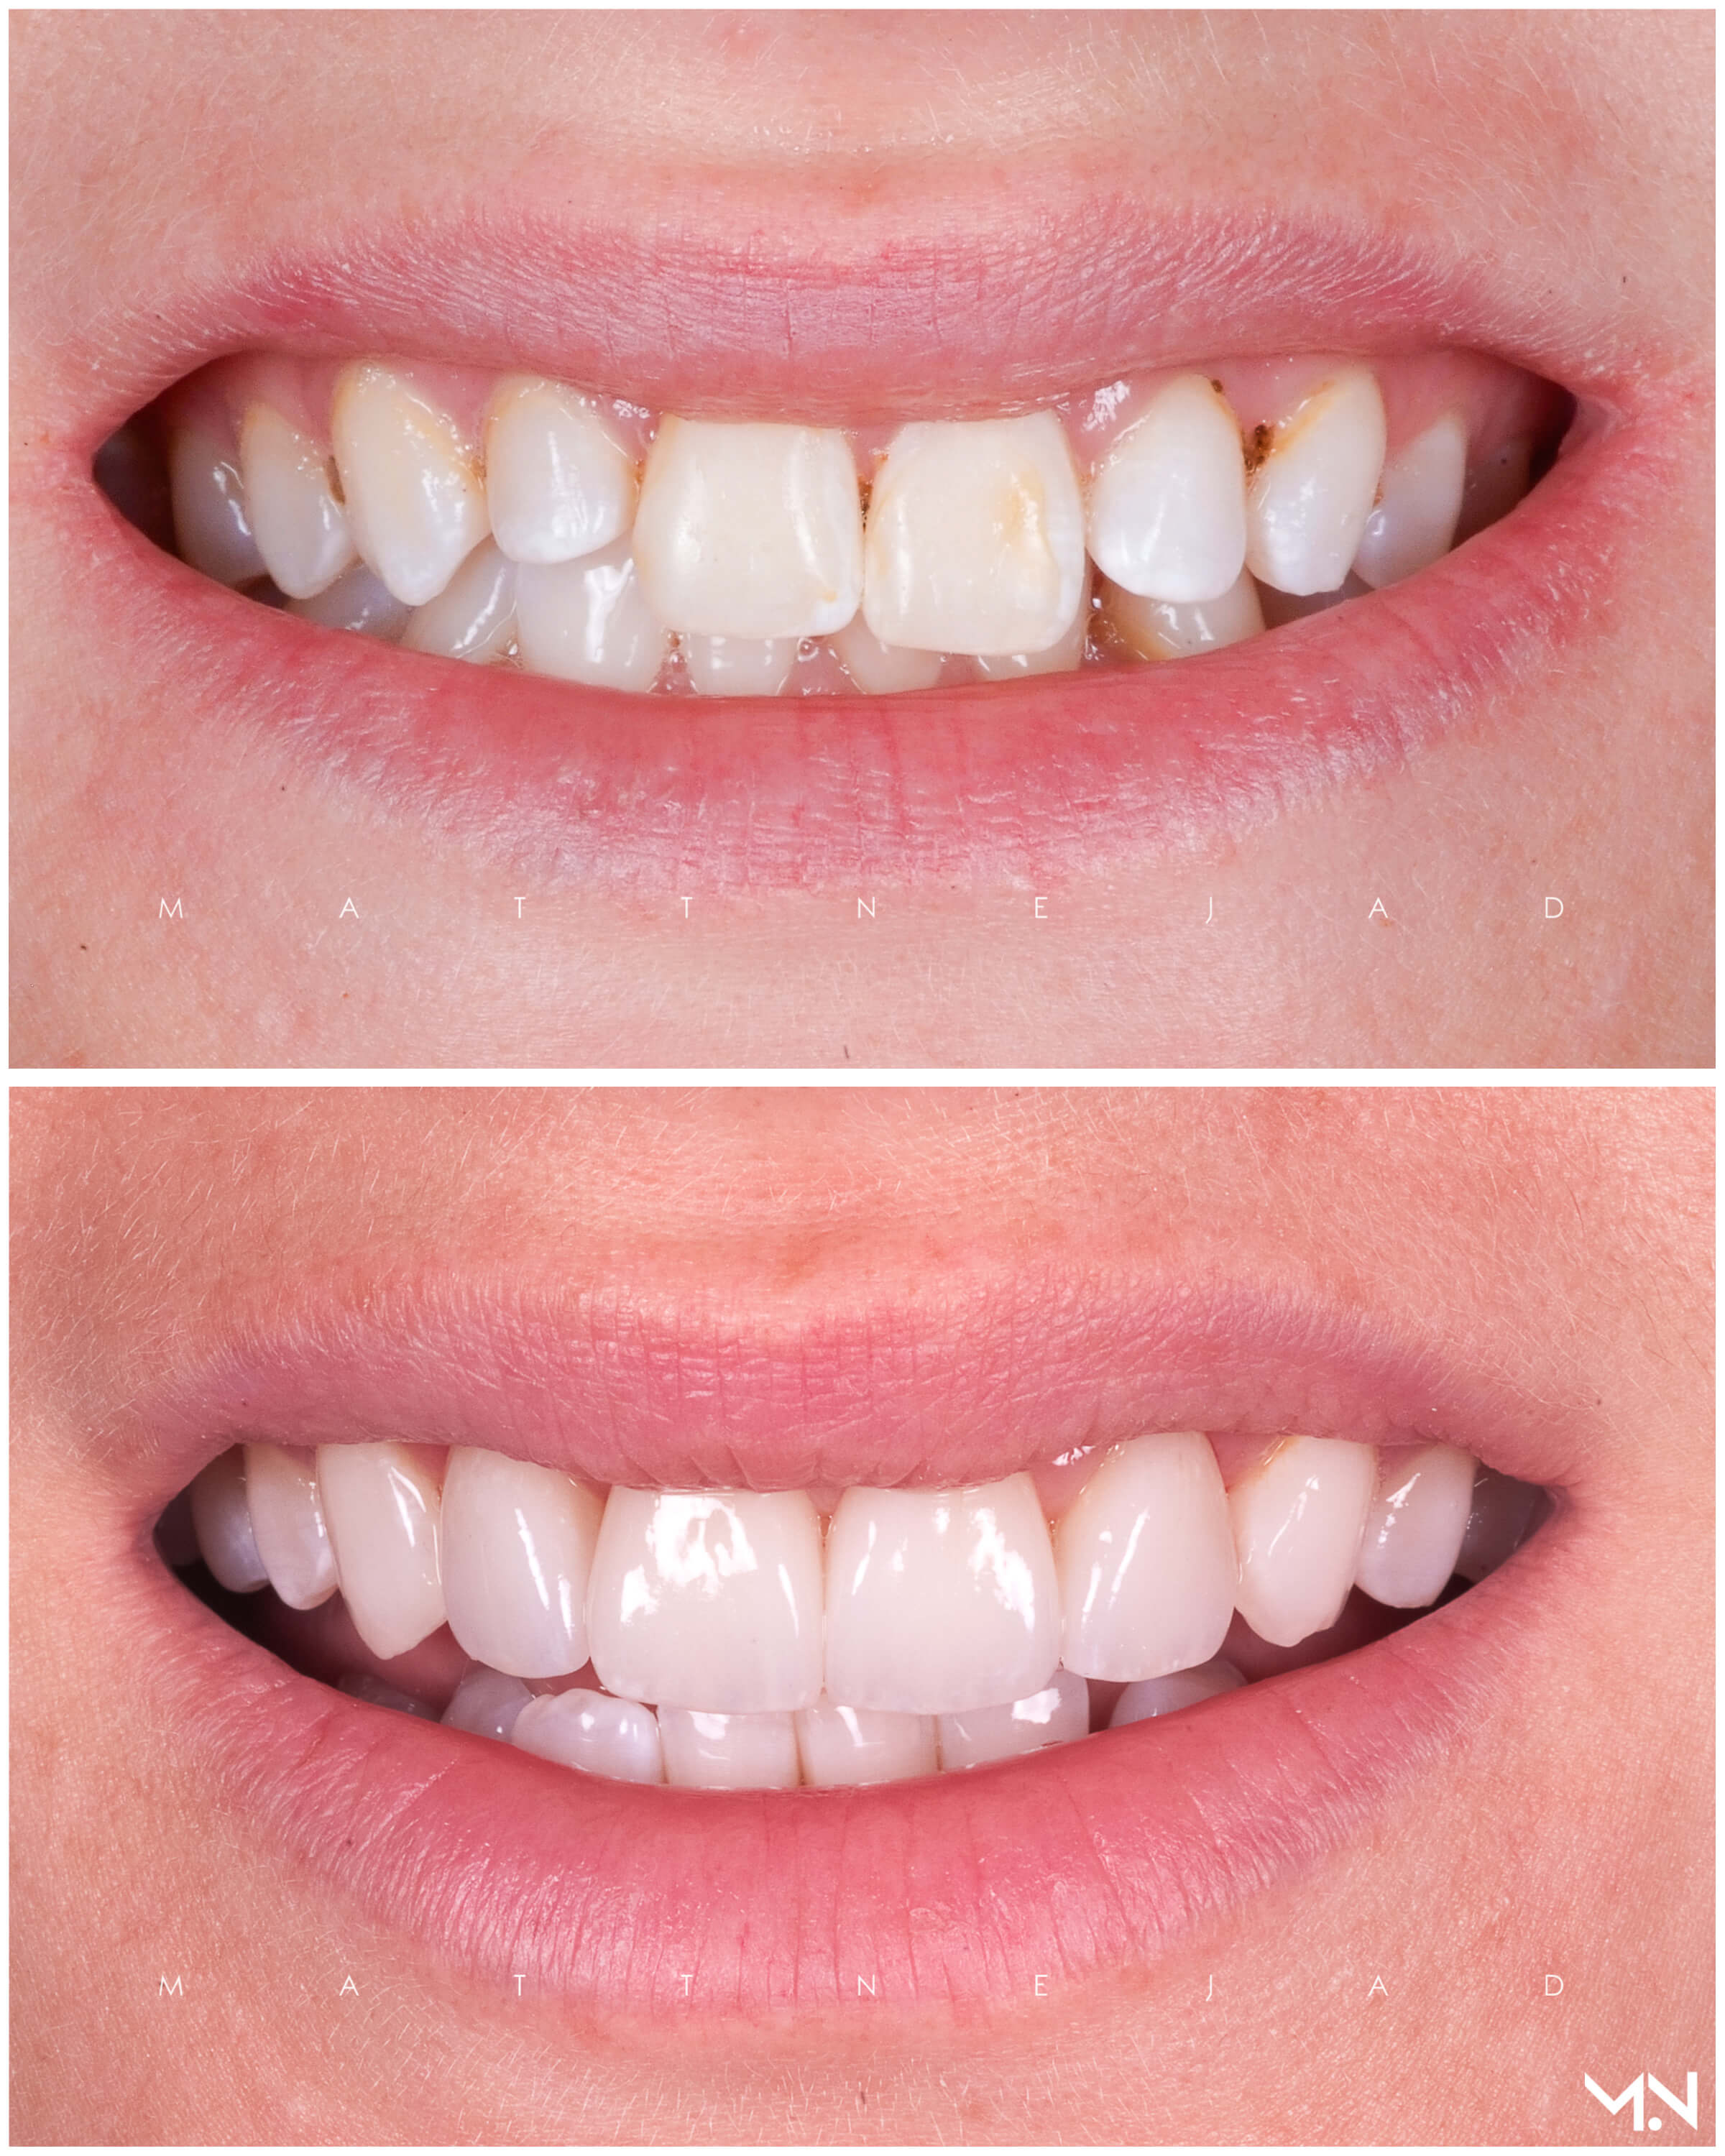 Cosmetic Smile Makeover to enhance smille - Before and after